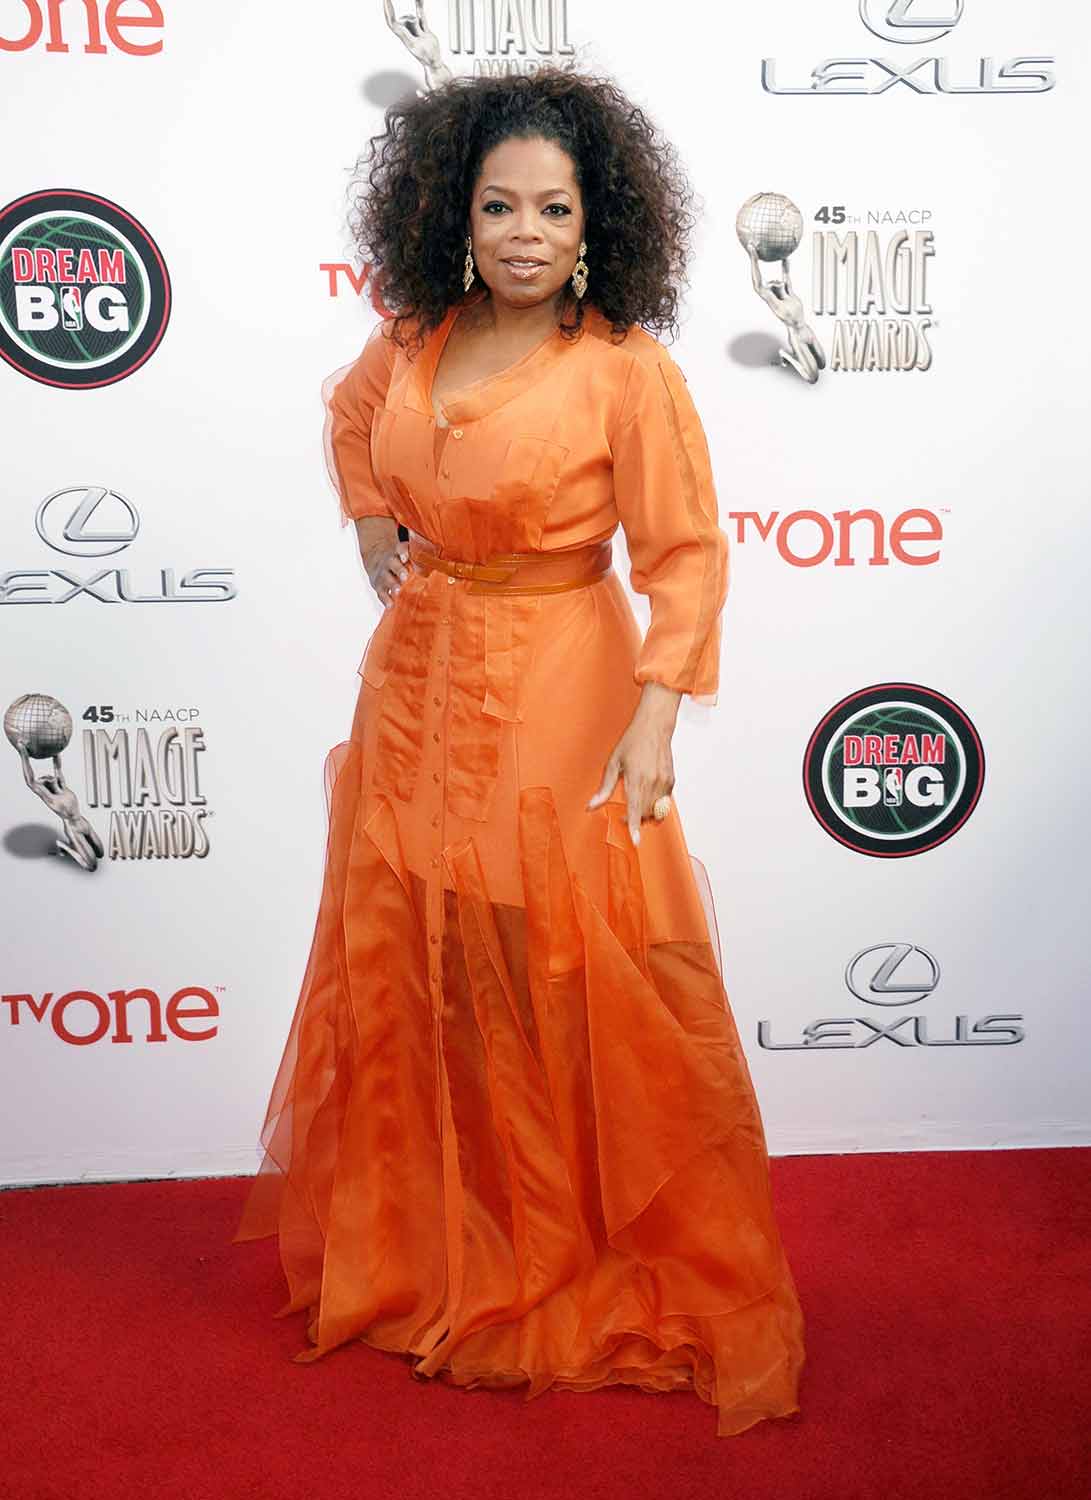 Coffee Talk: Oprah’s Harpo Films to Produce ‘Invention of Wings’